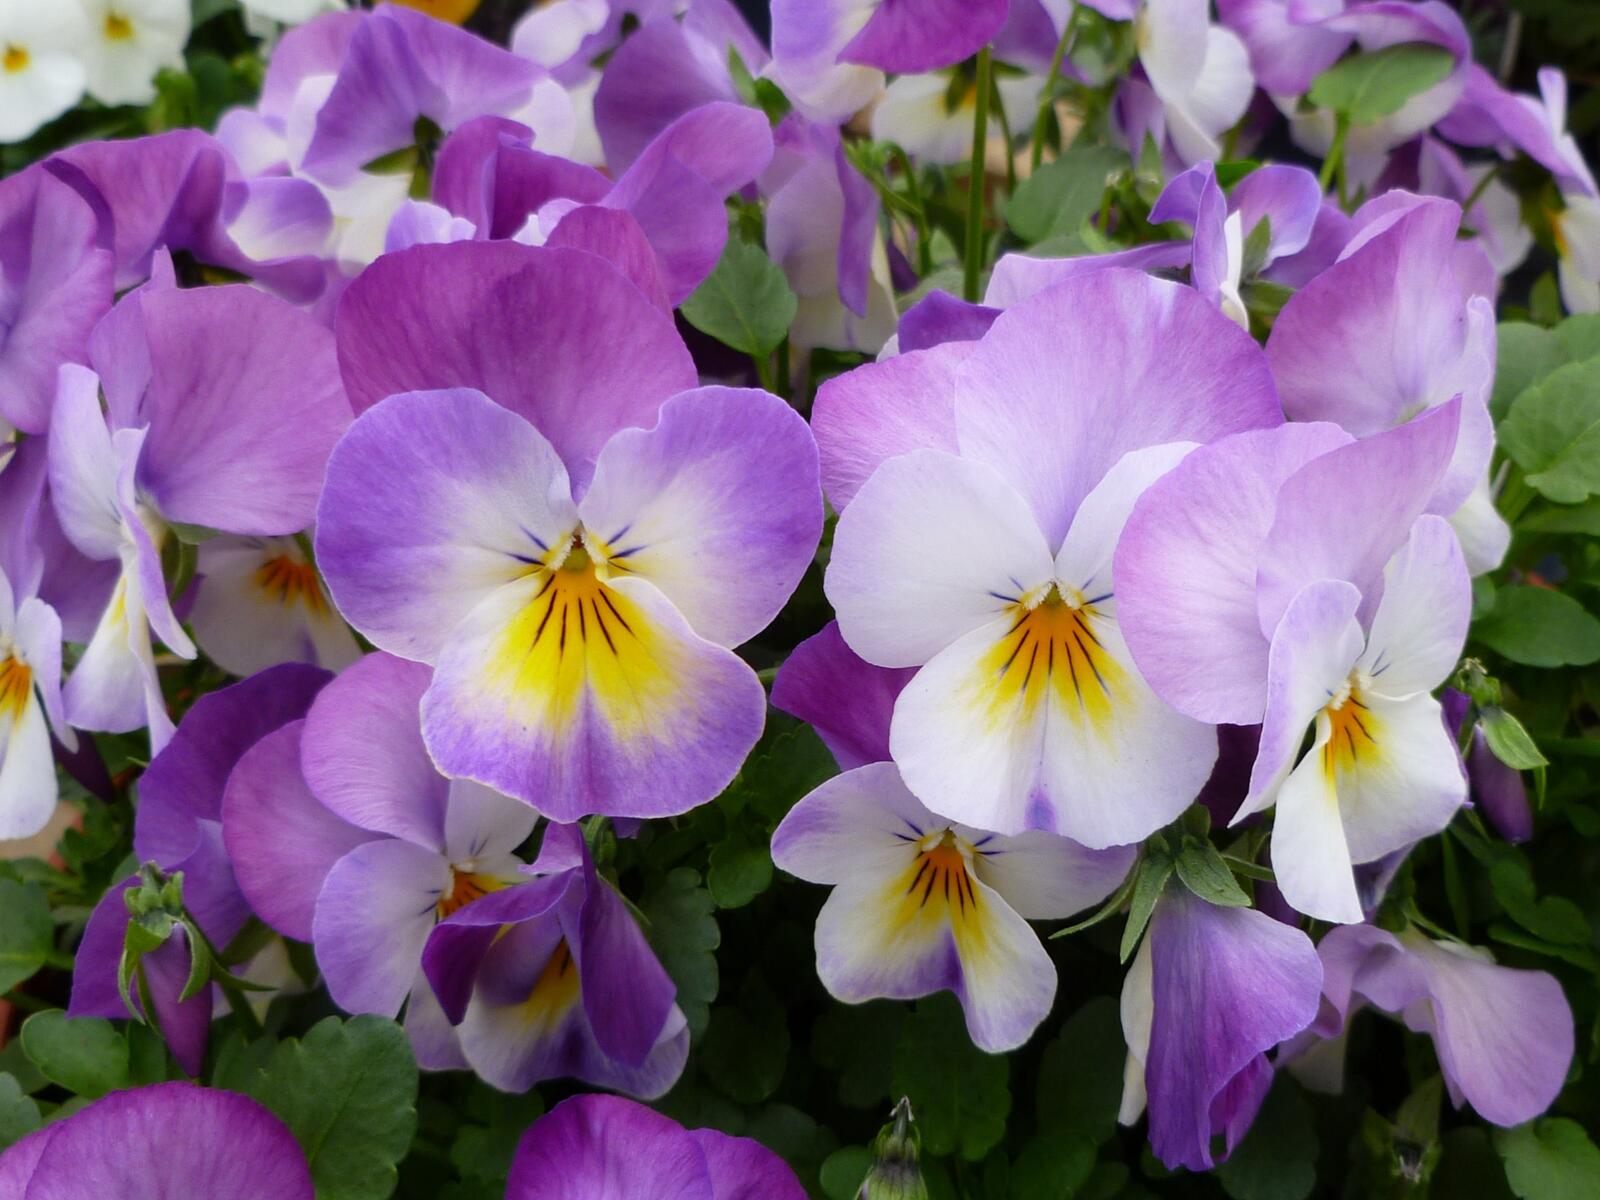 Wallpapers pansies garden pansy flowers on the desktop